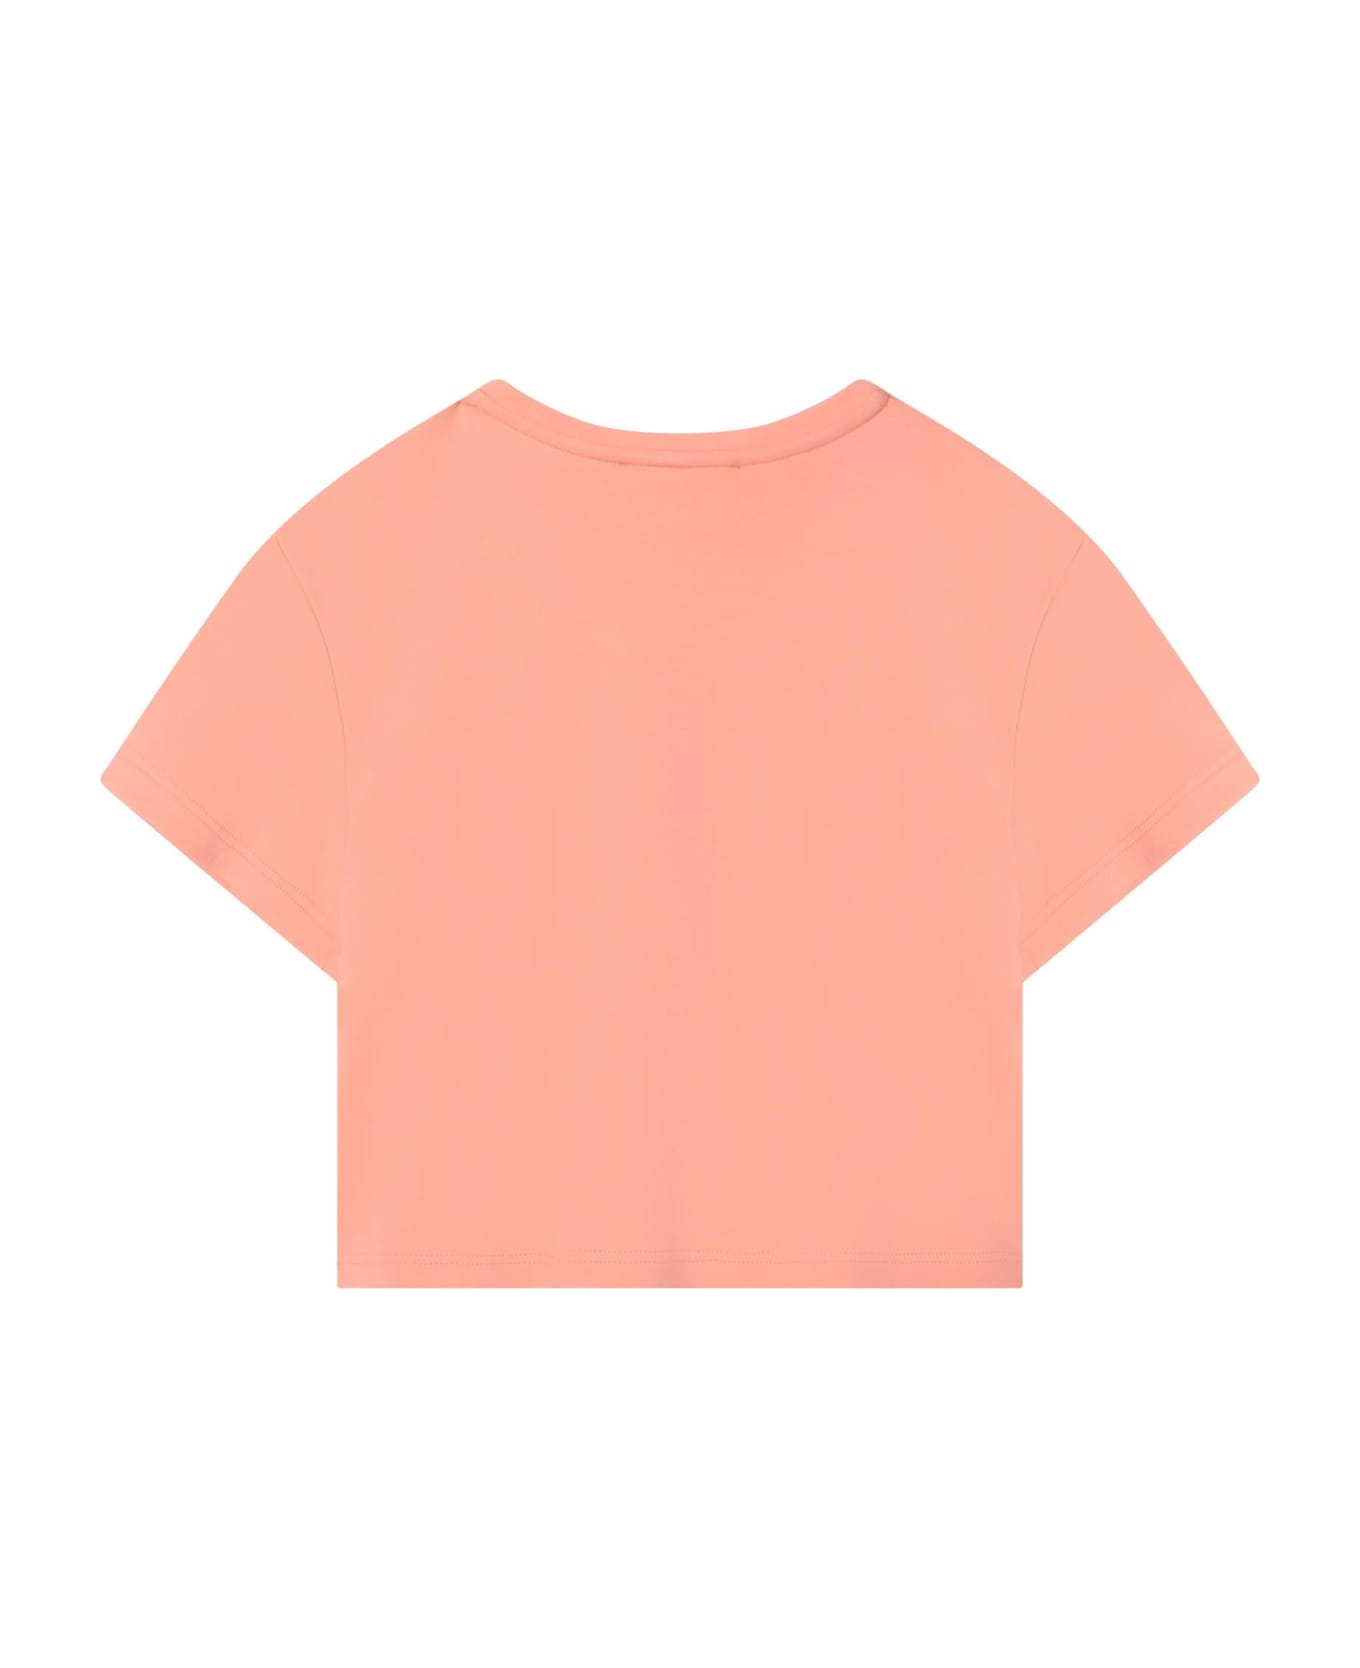 Chloé Broderie Anglaise Lace T-shirt - C Albicocca